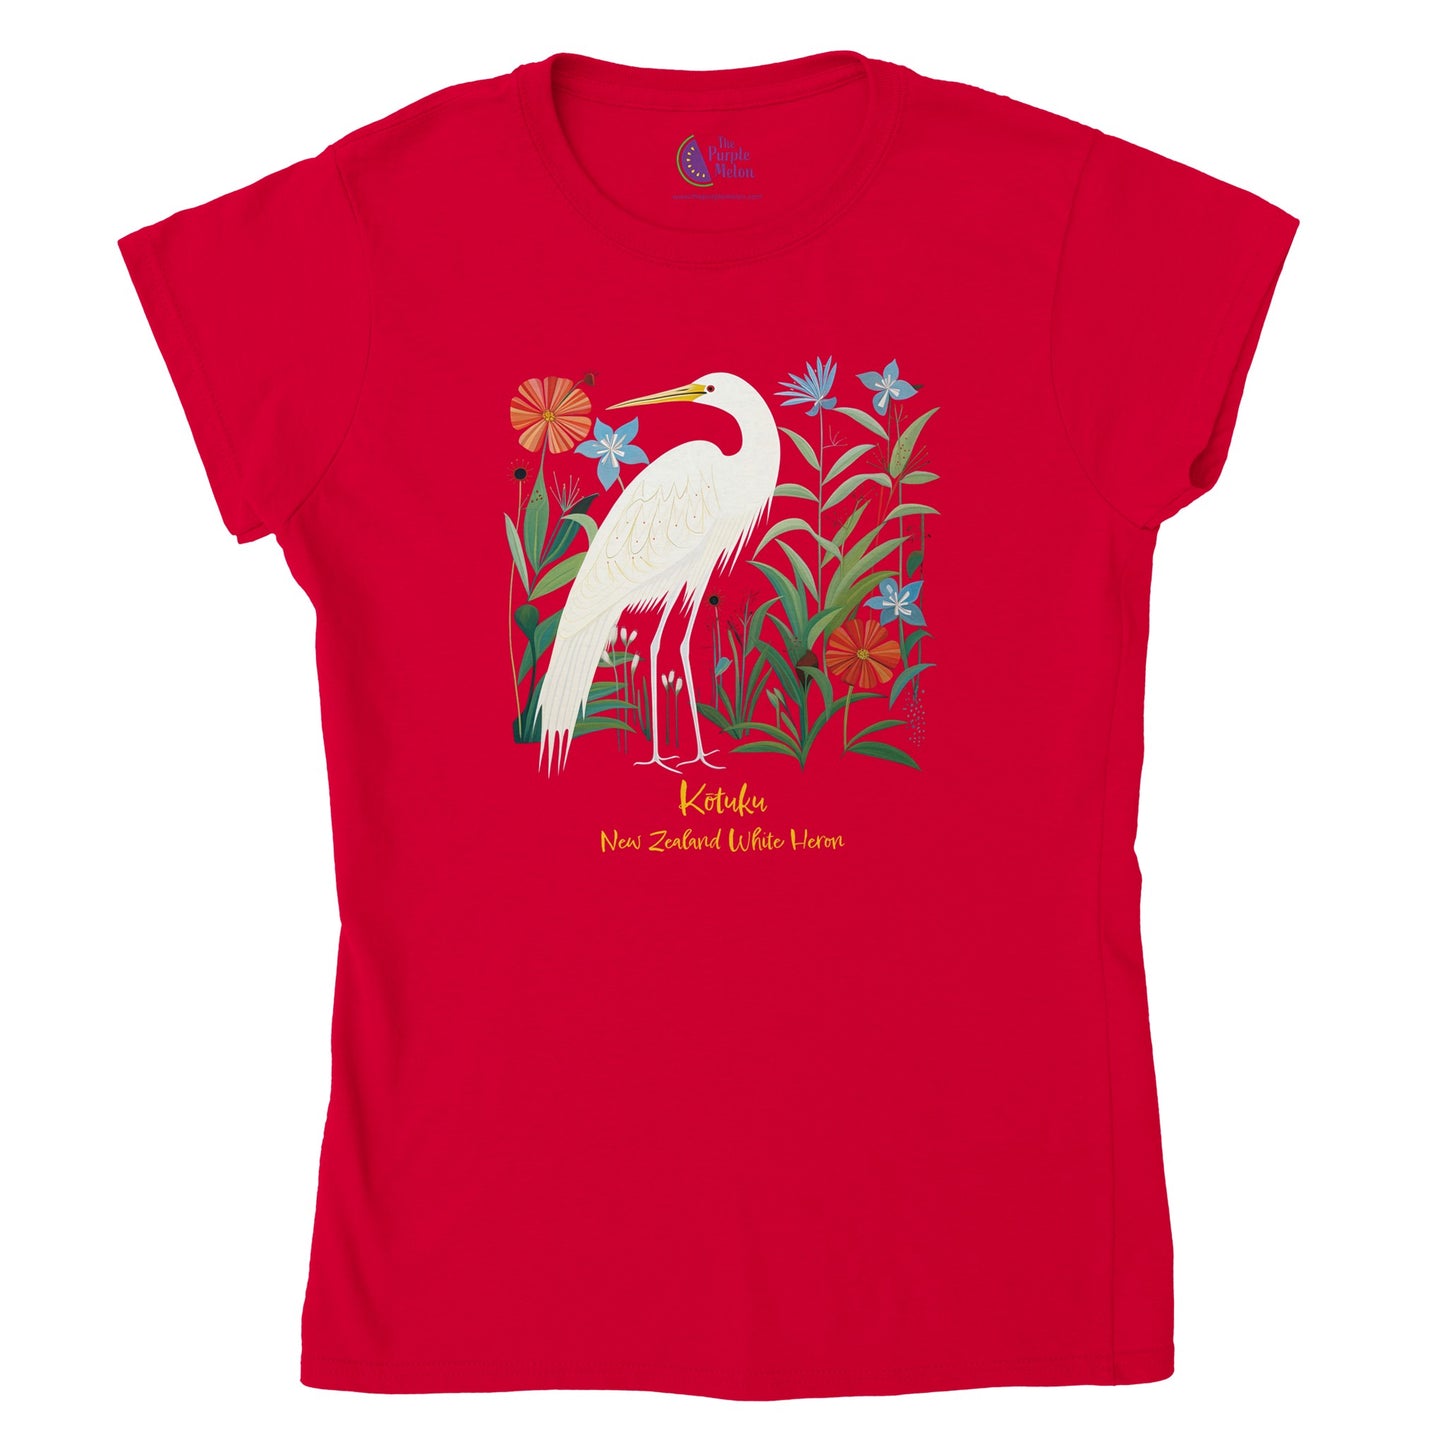 Red t-shirt with a New Zealand Kōtuku white heron print